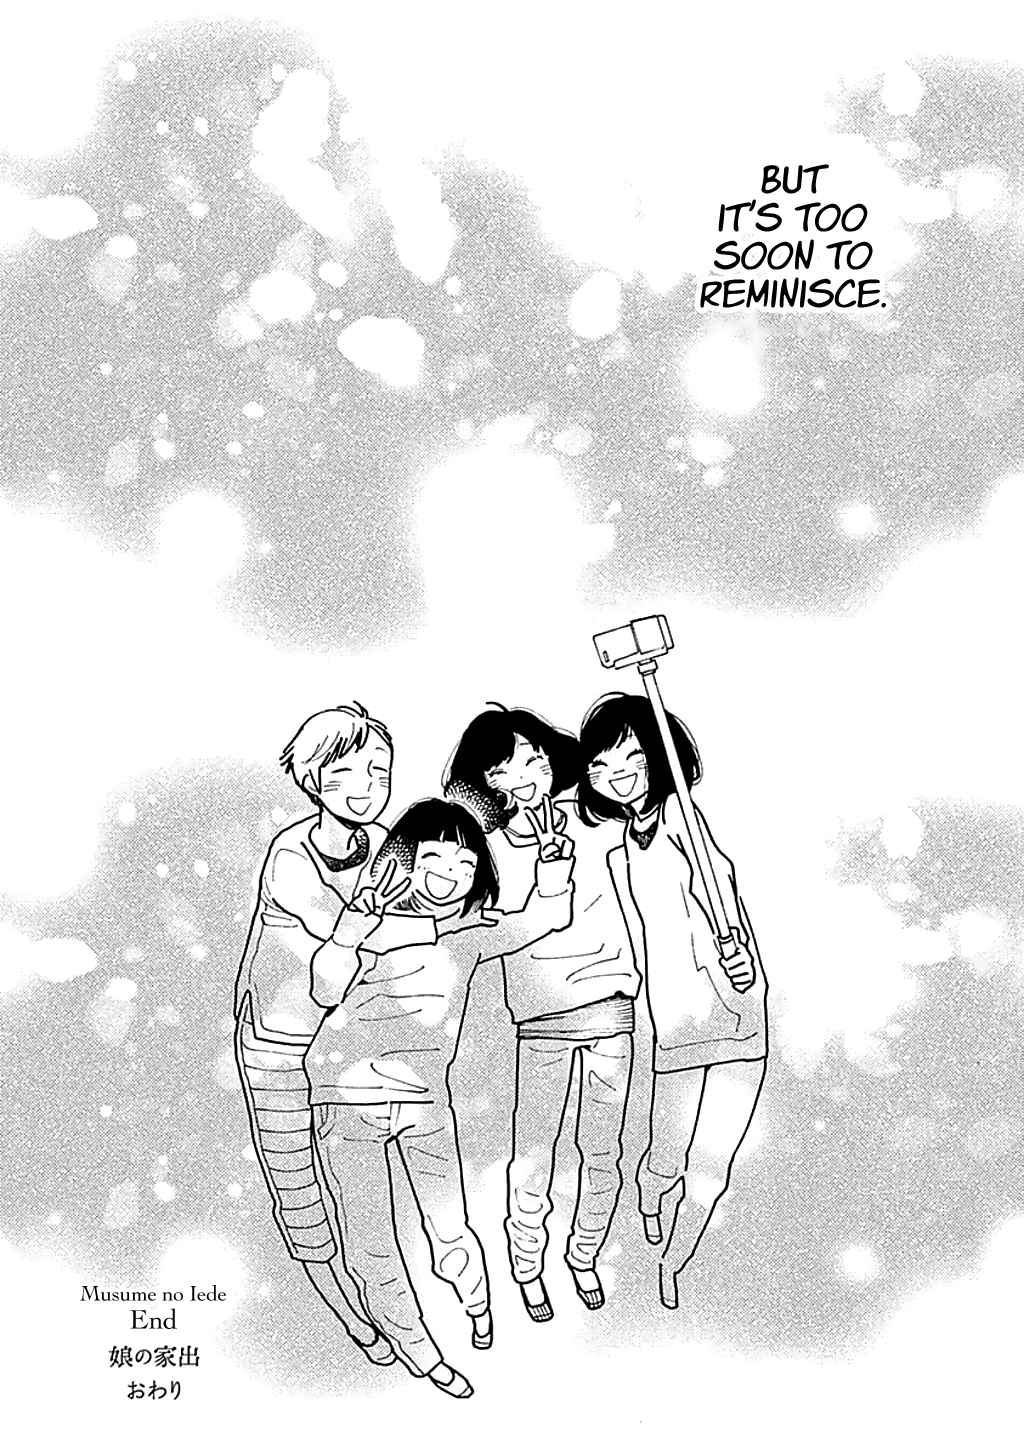 Musume no Iede Vol. 6 Ch. 36 Come, Spring Part 2